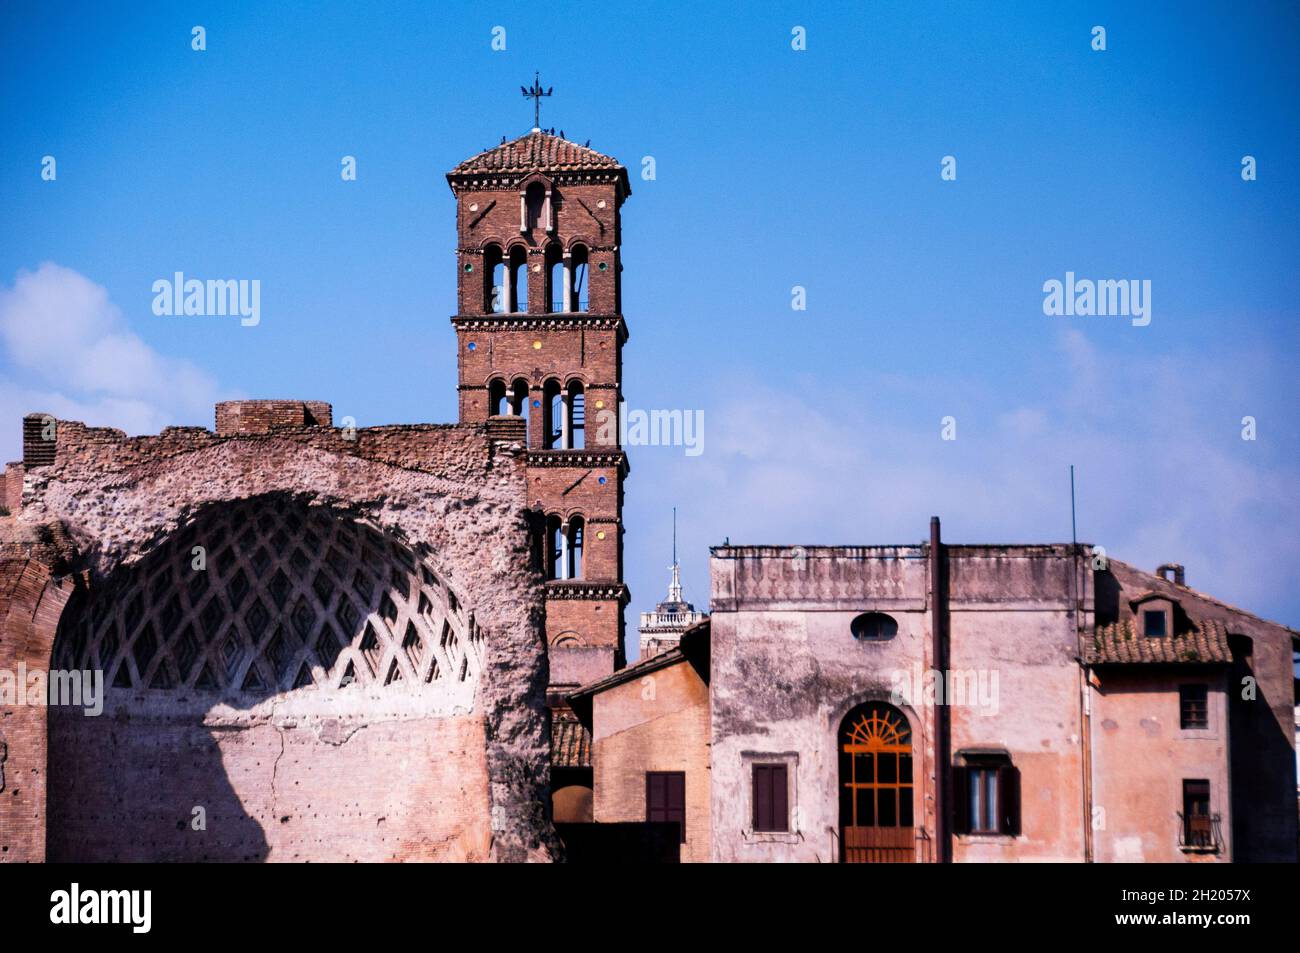 Temple of Venus and Roma with elaborate apex is thought to have been the largest temple in Ancient Rome, Italy. Stock Photo